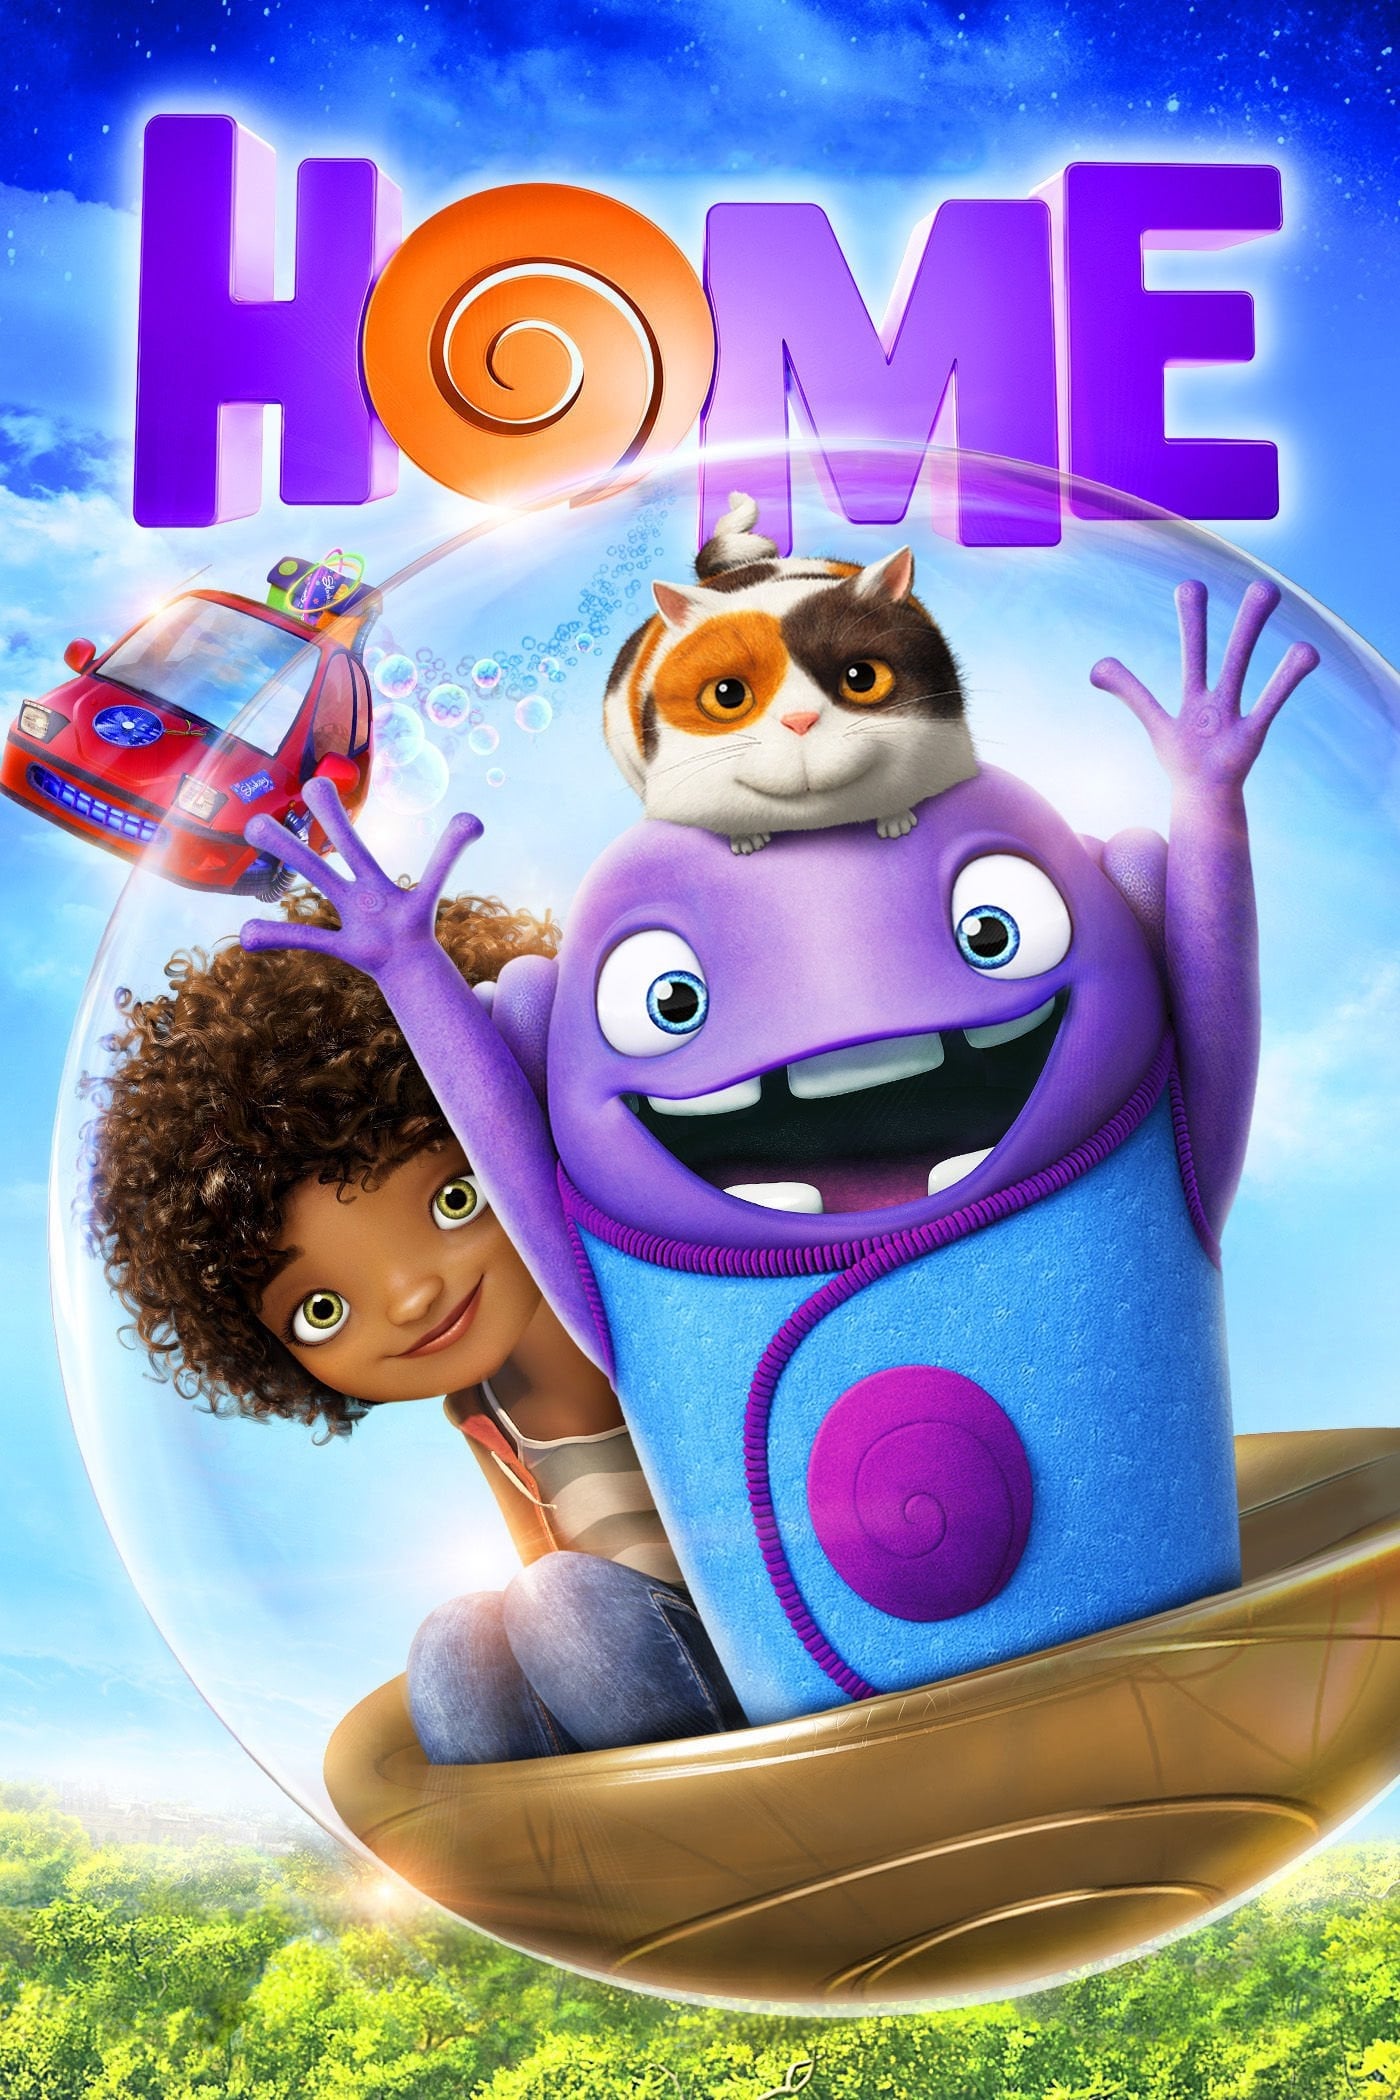 home movie review english